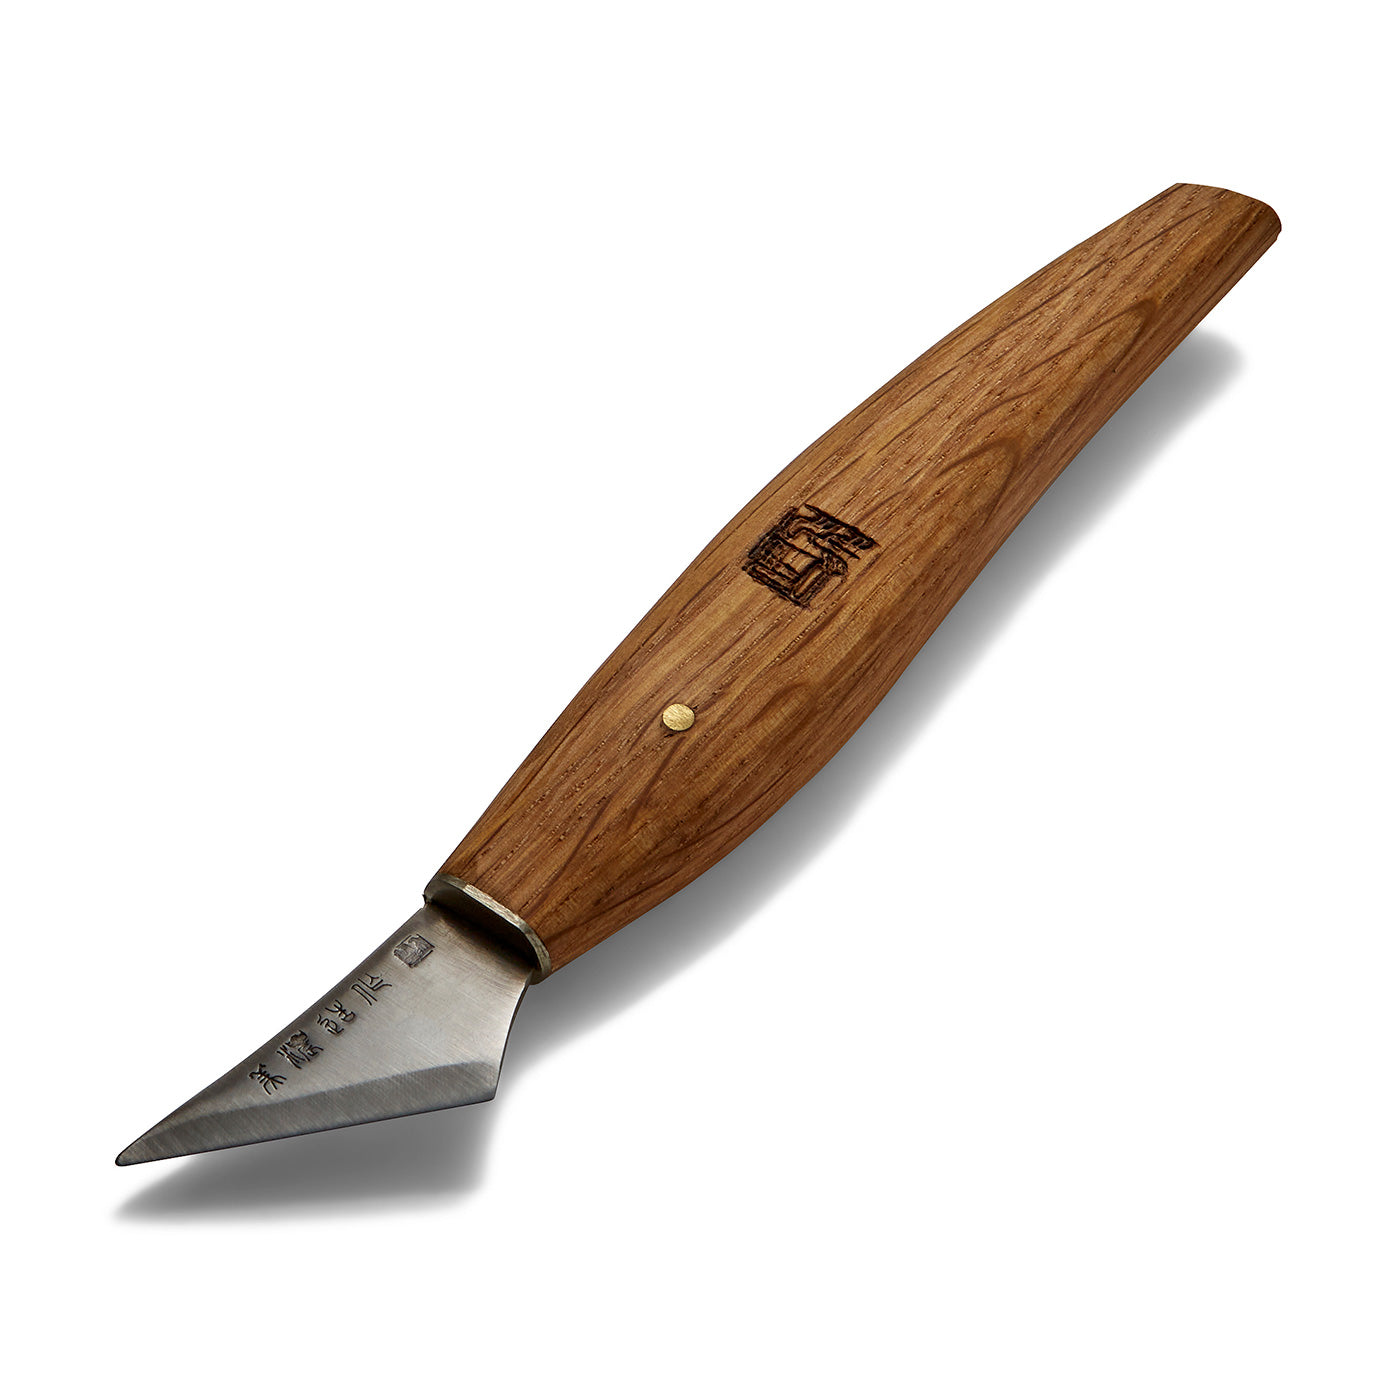 Japanese Carving Knifes  Next Day Delivery – Rutlands Limited